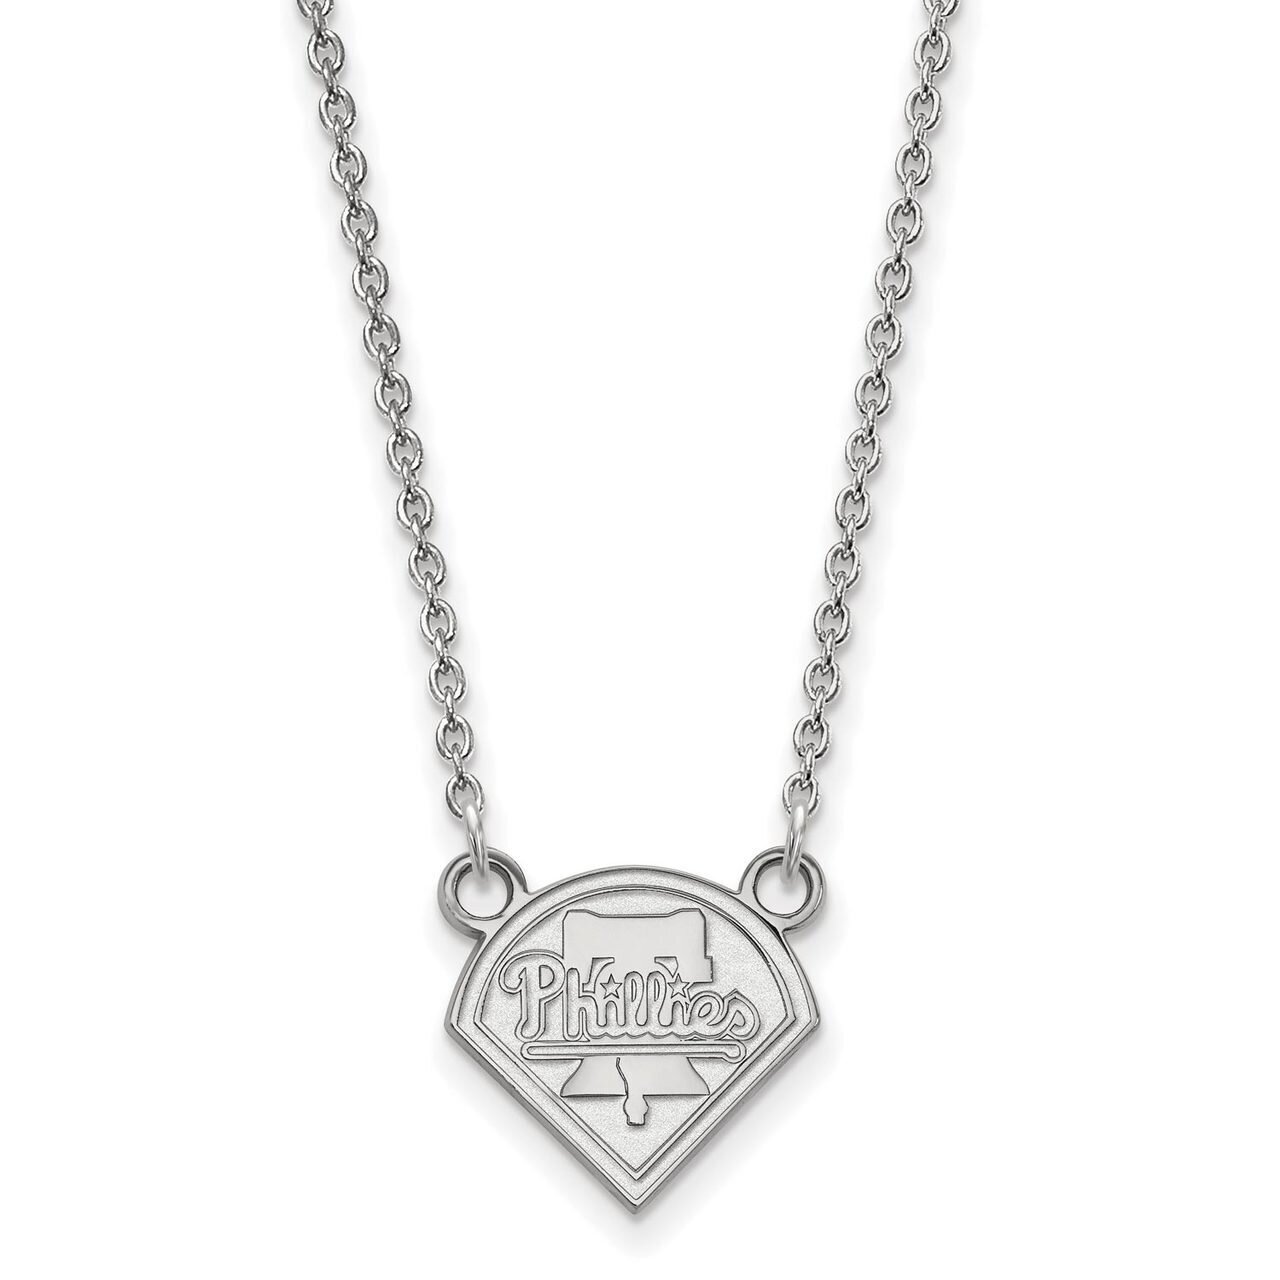 Philadelphia Phillies Small Pendant with Chain Necklace 14k White Gold 4W006PHI-18